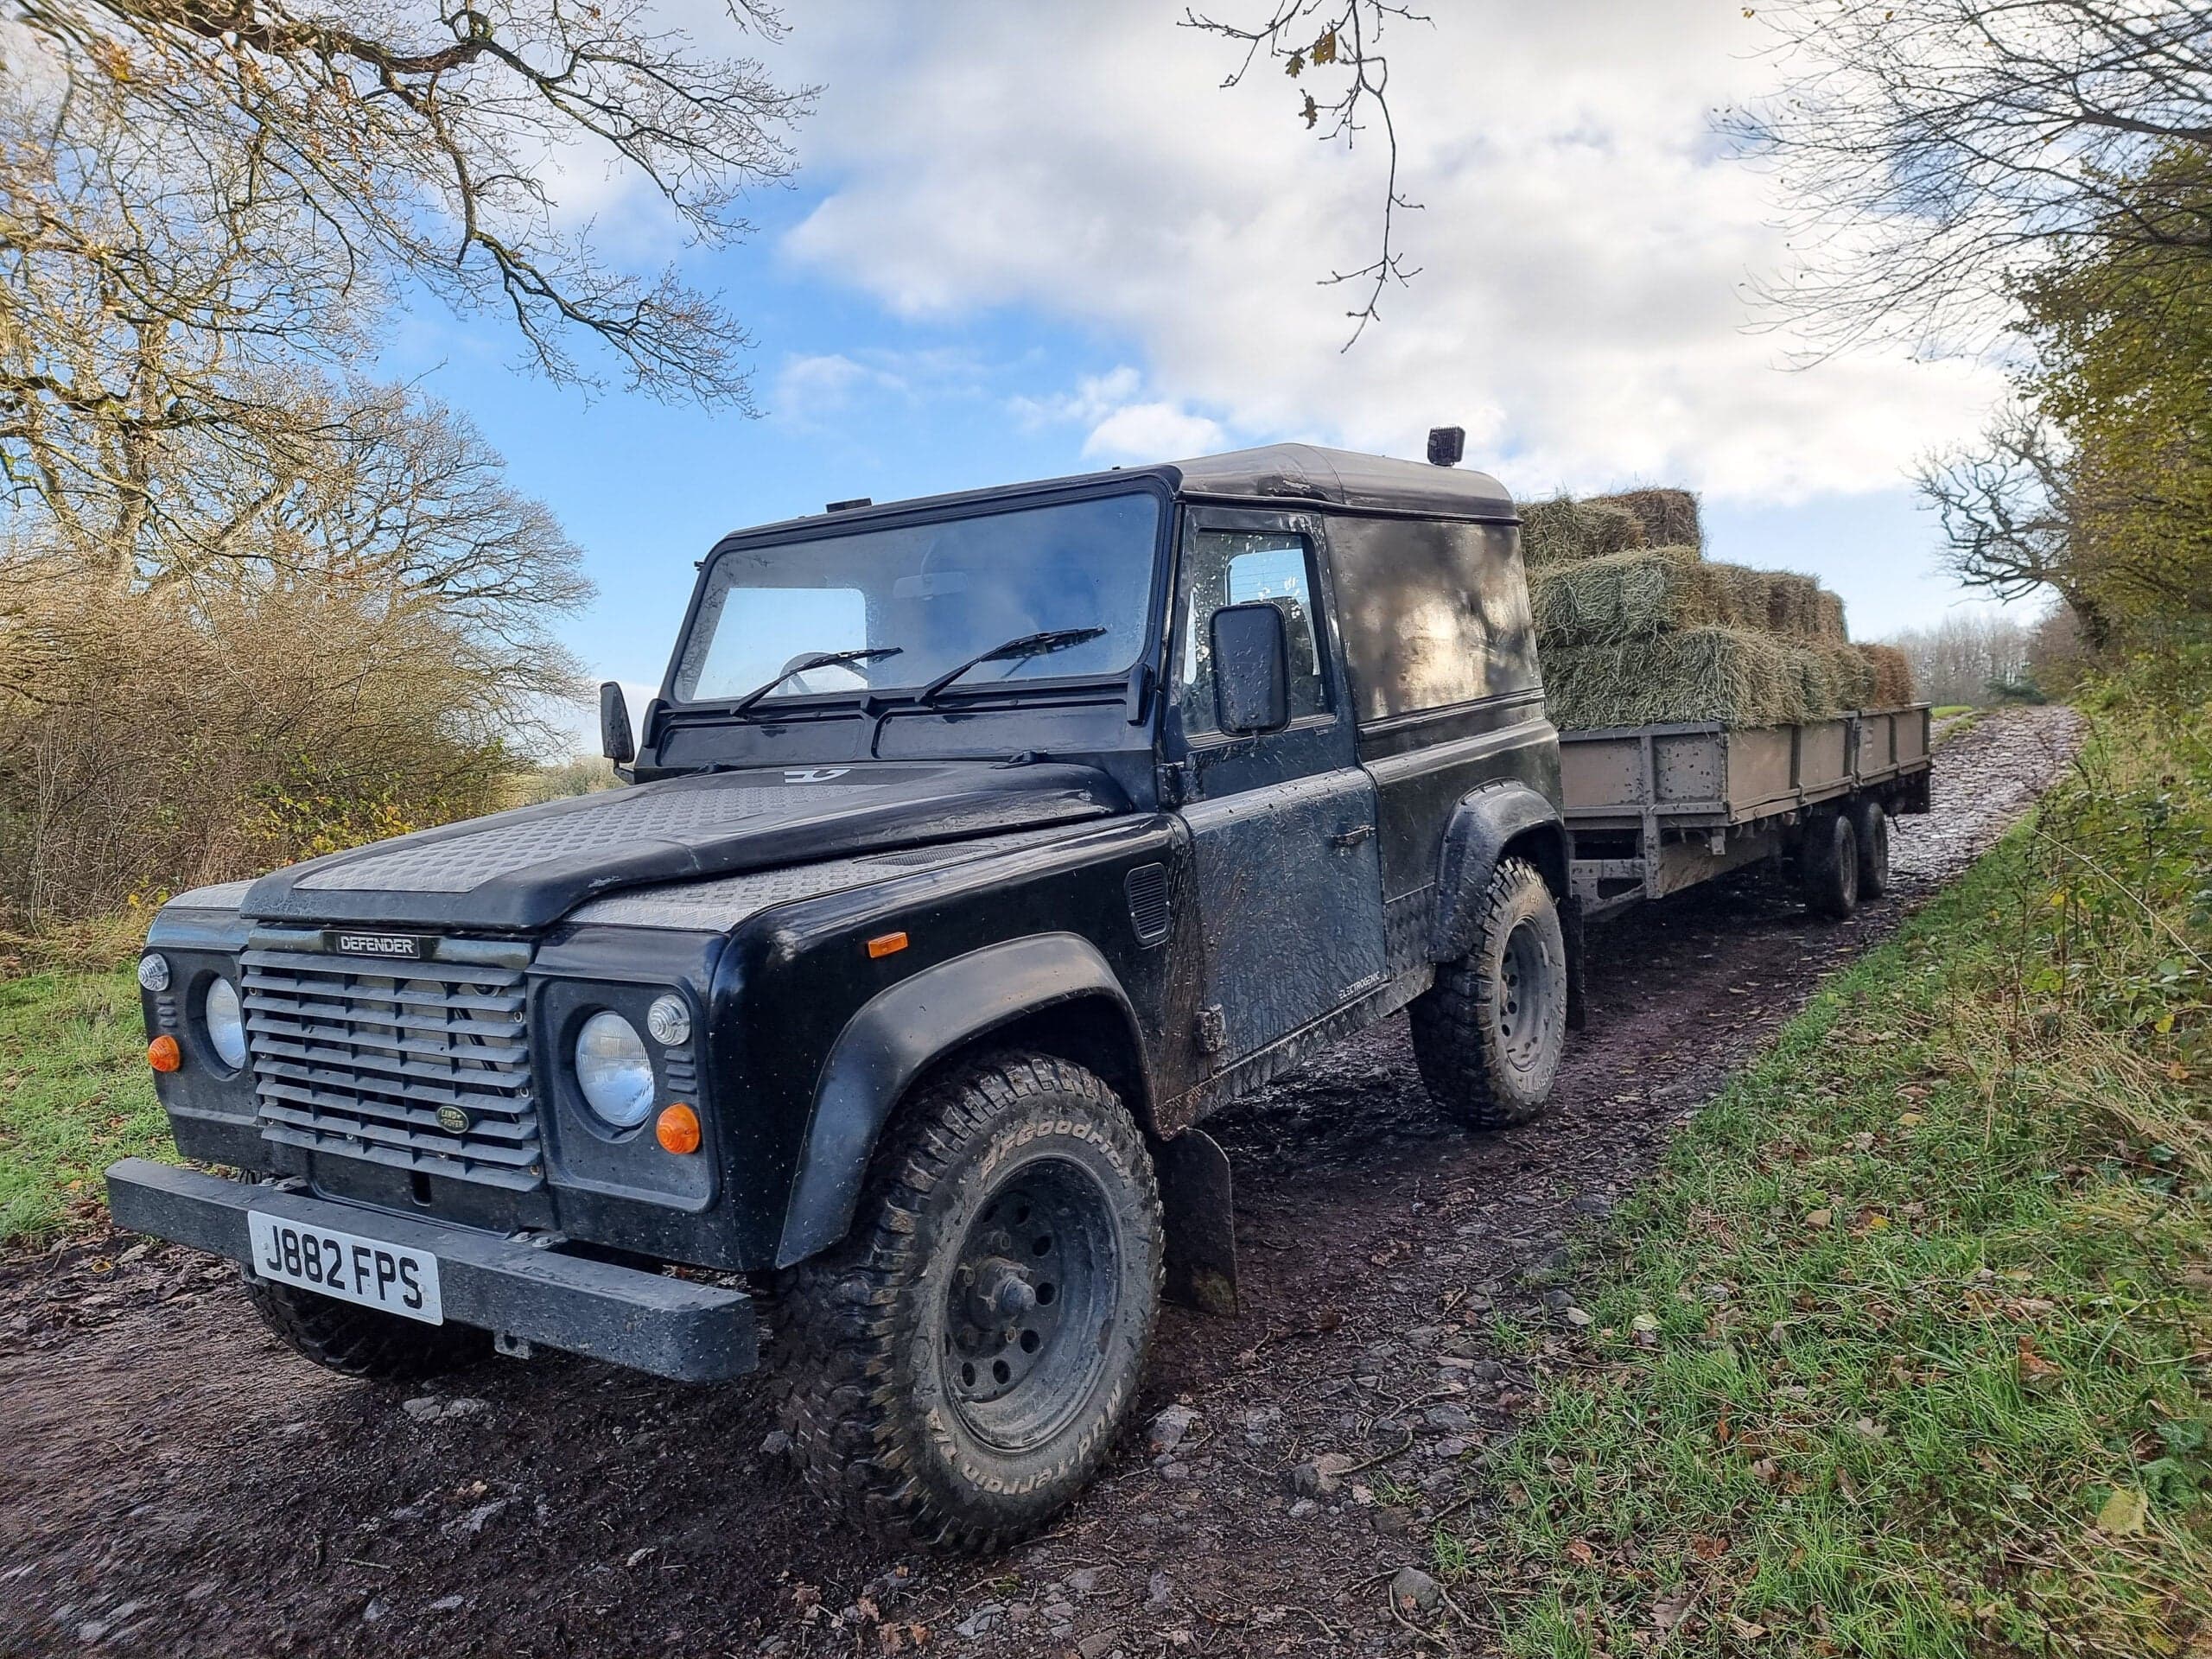 One of the converted Land Rover Defenders towing bales of hay loaded on a trailer